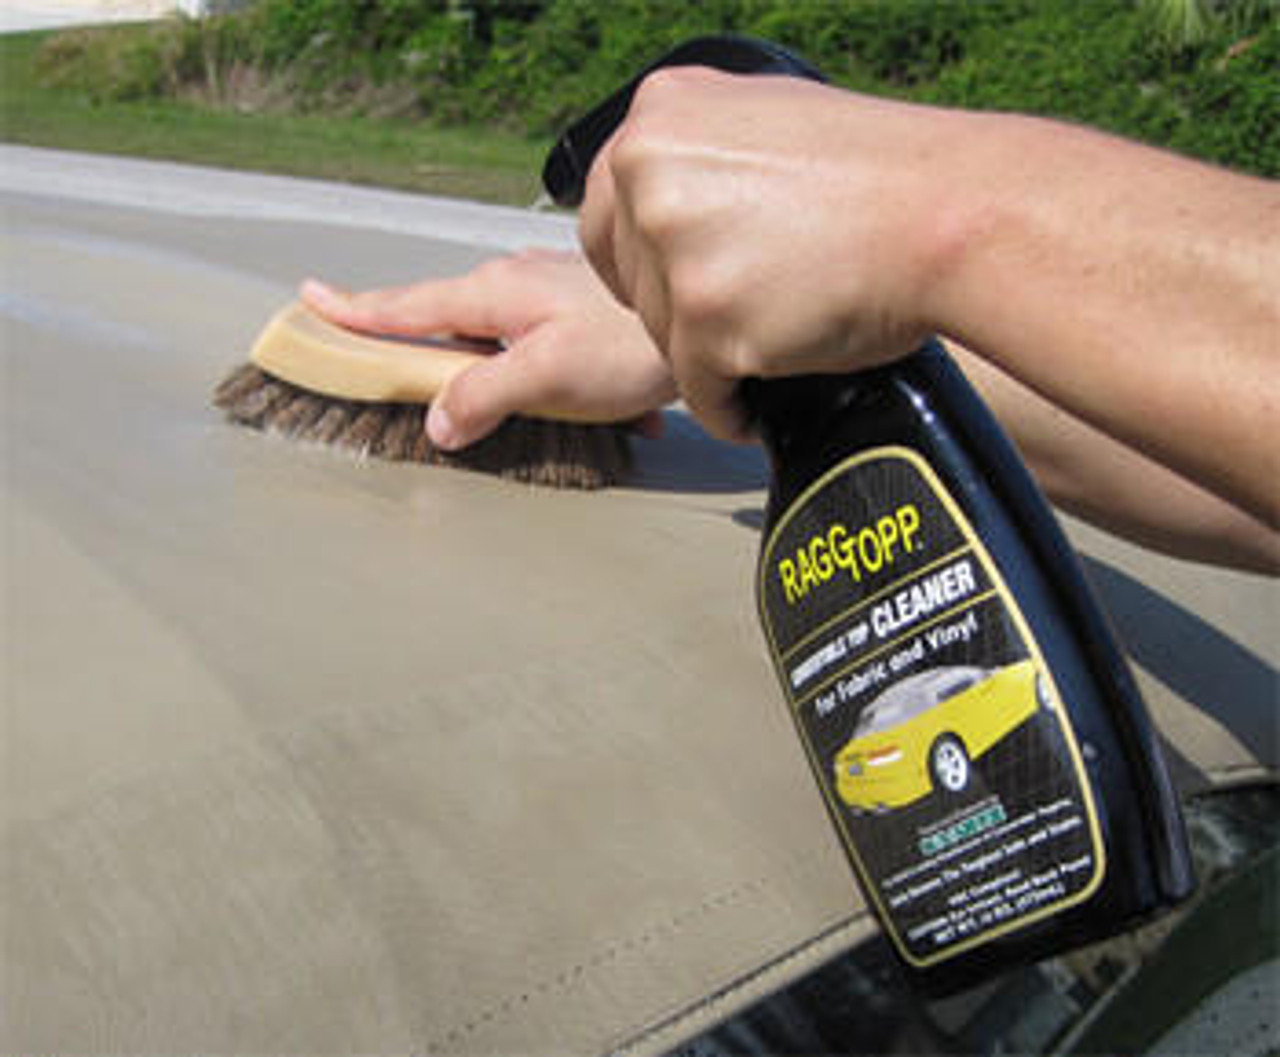 Raggtopp Convertible Plastic Window Cleaner & Protectant Kit